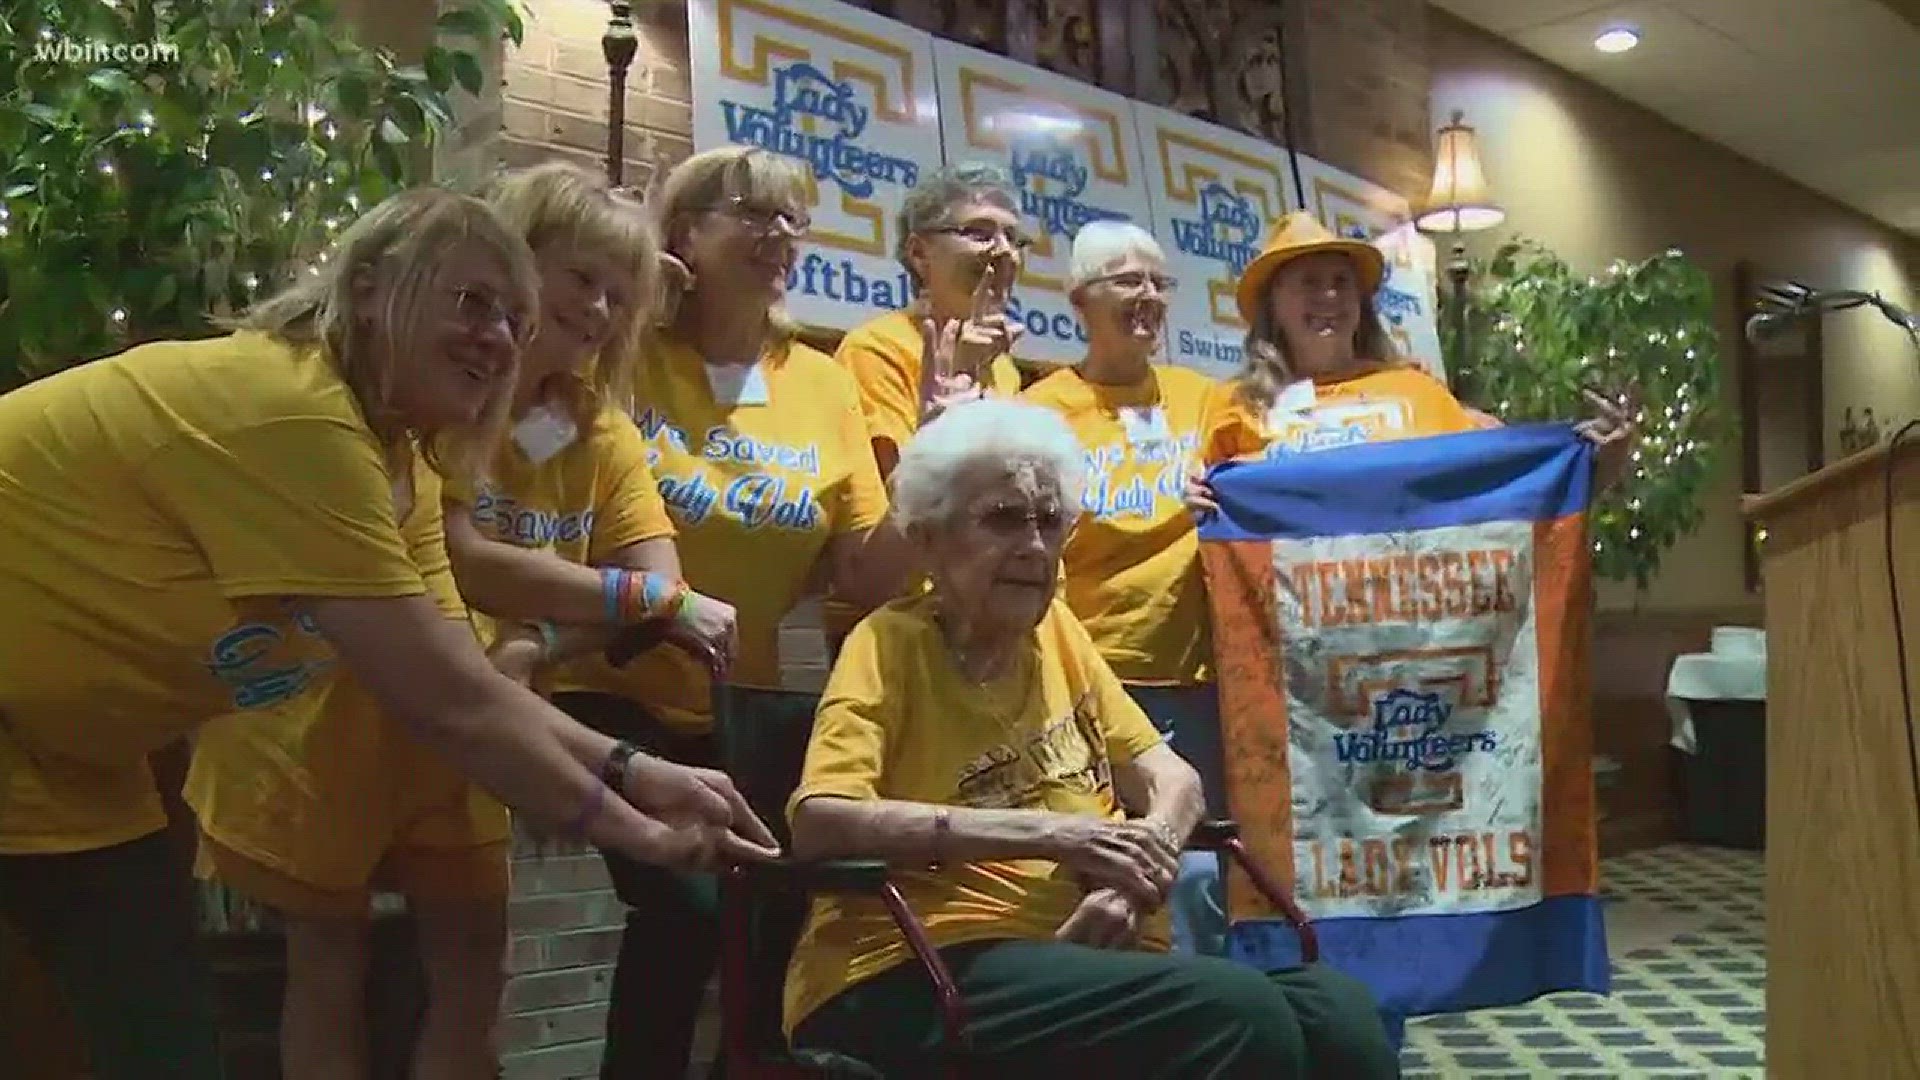 Some of the most influential people in getting the Lady Vol logo restored met to celebrate.